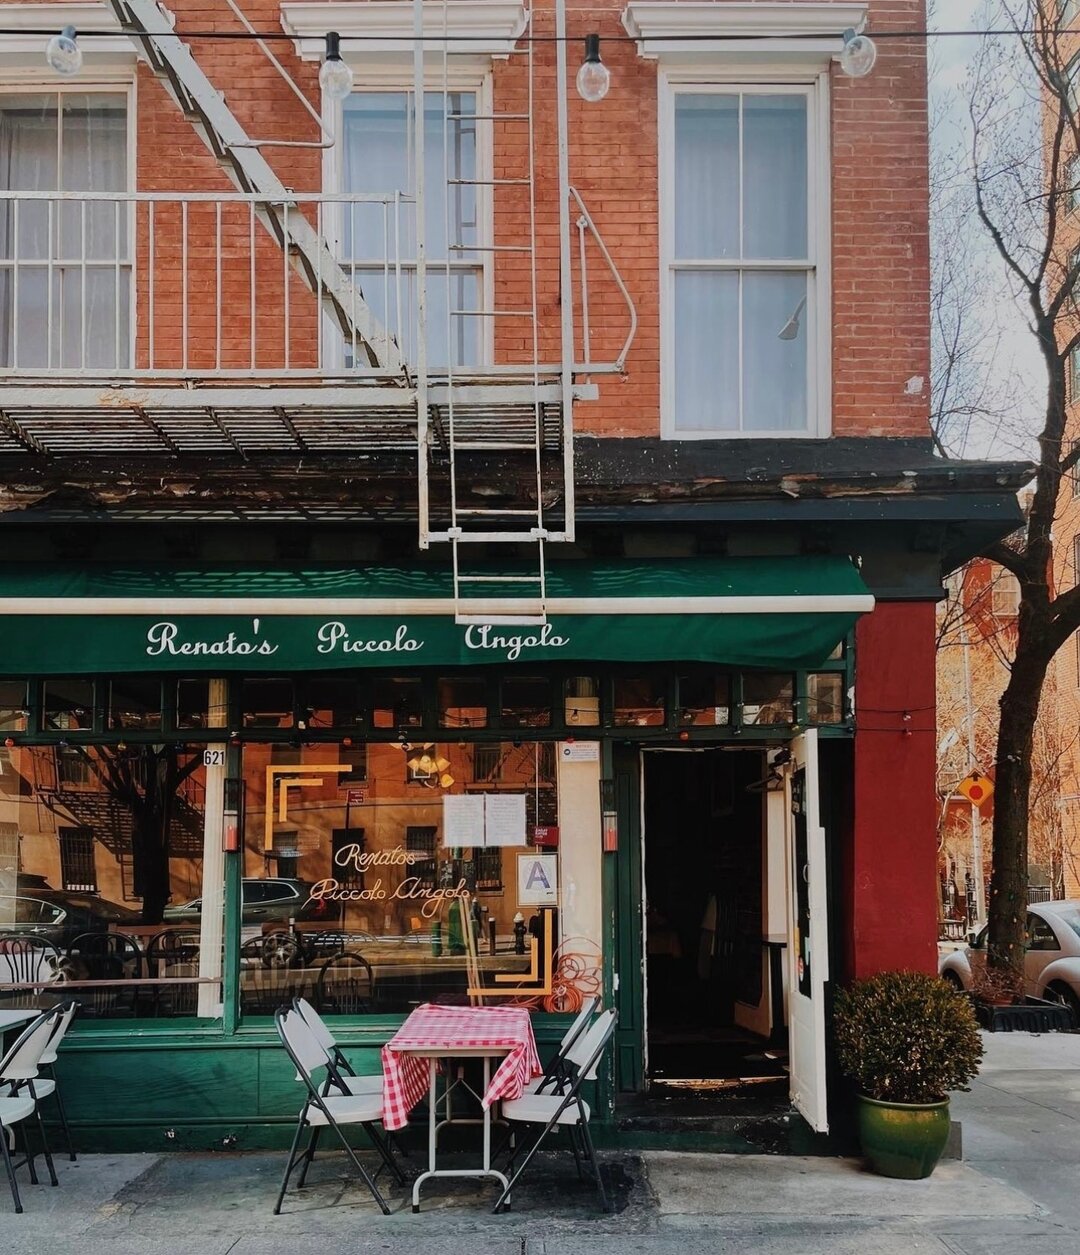 @piccolo_angolo_nyc has been in the West Village for over 30. years. It's such a beloved institution, fans raised $70k for the restaurant in 2022 to help them stay open after the challenges of the pandemic. We're looking forward to more charming side